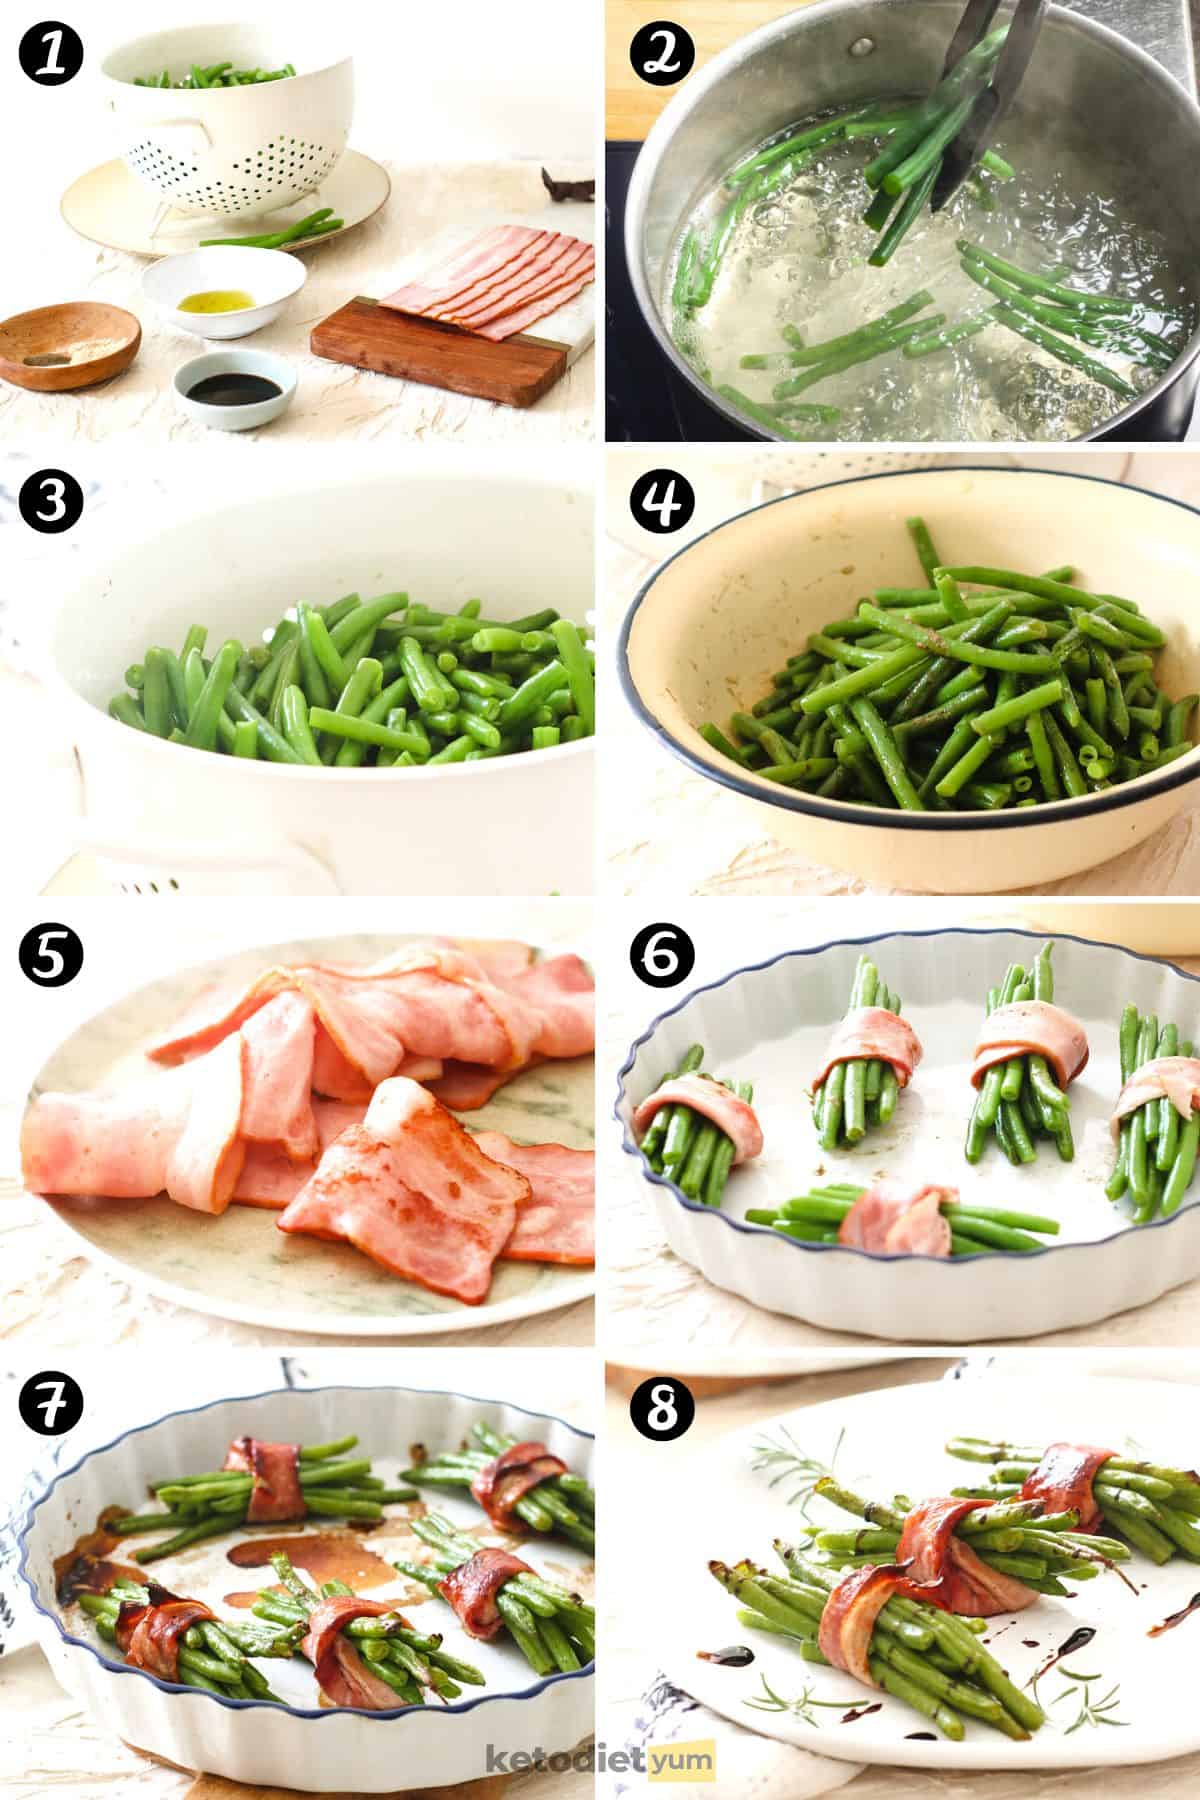 Keto Bacon-Wrapped Green Beans Instructions